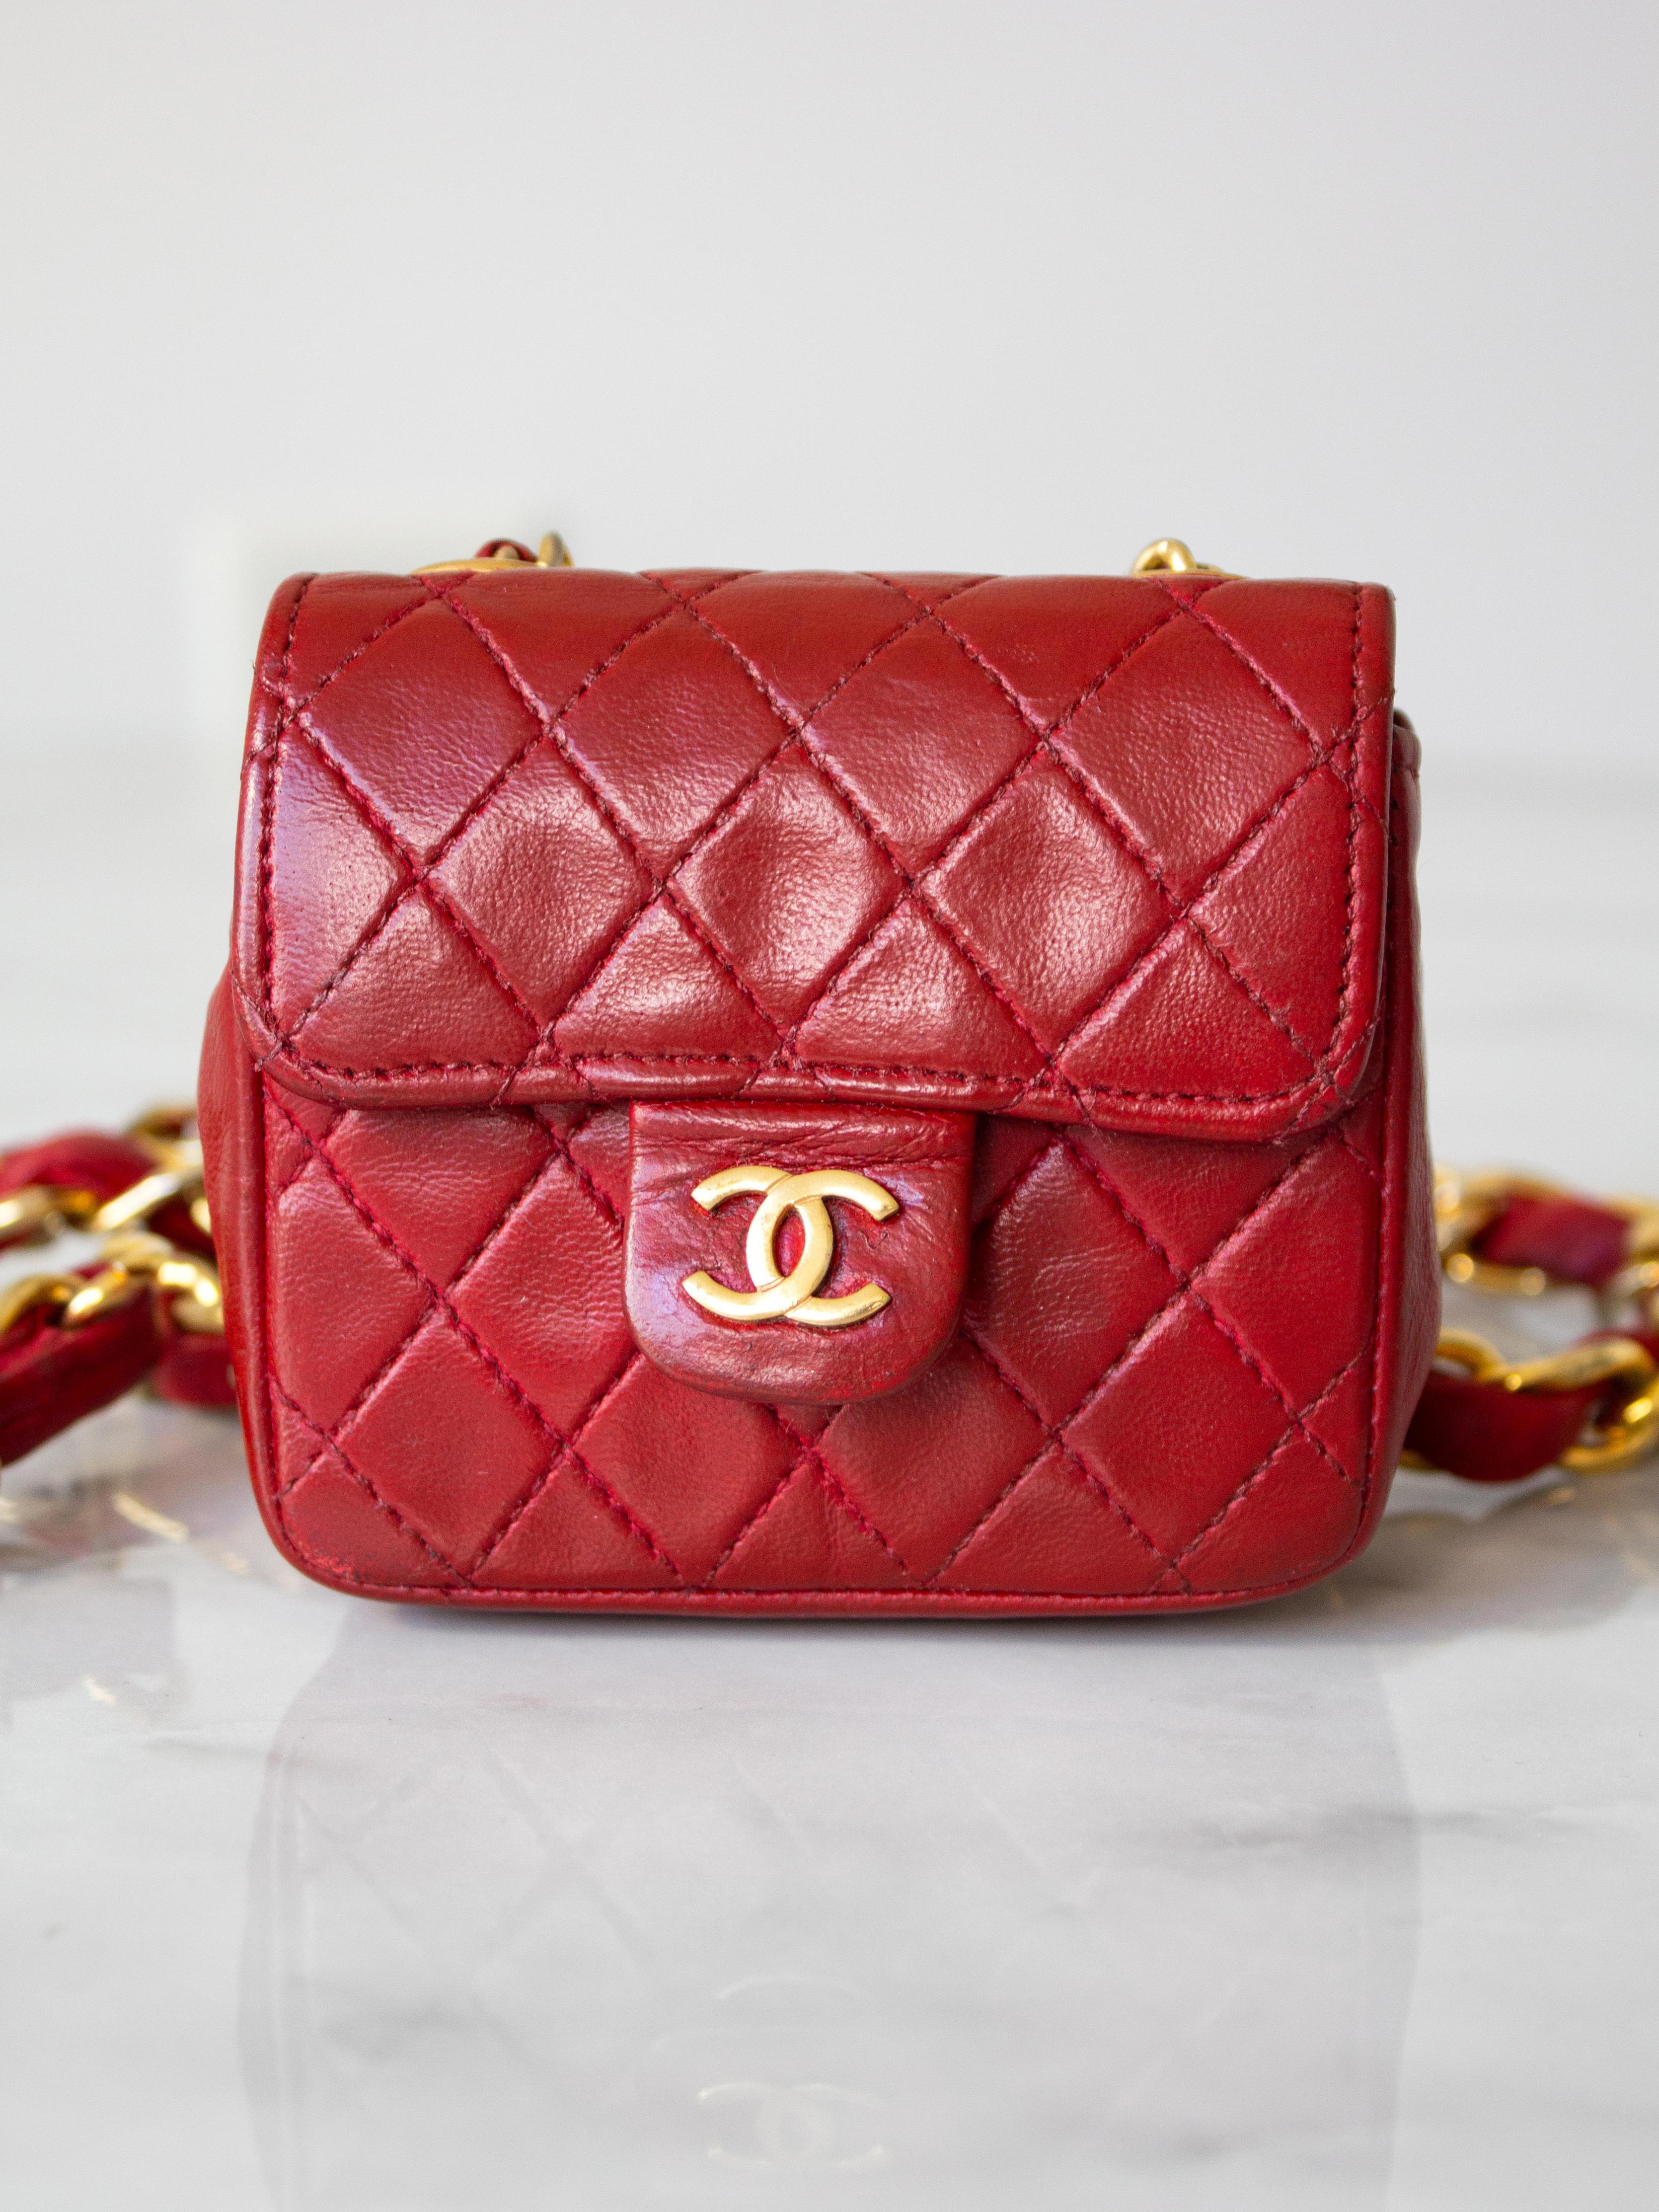 Chanel Vintage 1990s Micro Mini Red Gold CC Lambskin Leather Waist Belt Bag In Fair Condition For Sale In Jersey City, NJ